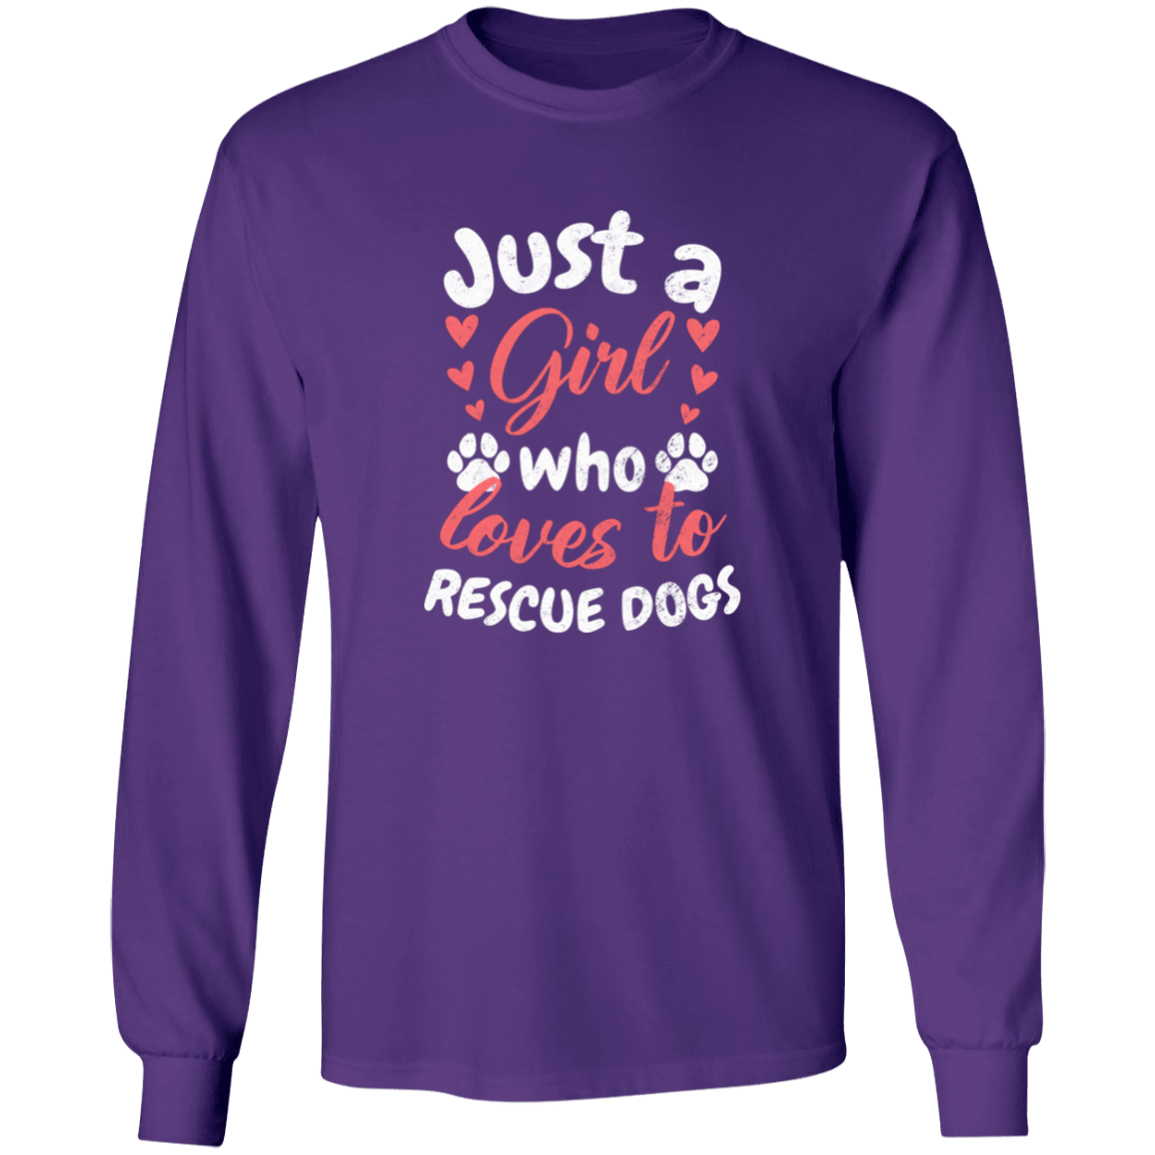 Just A Girl Who Loves To Rescue Dogs - Long Sleeve T Shirt.